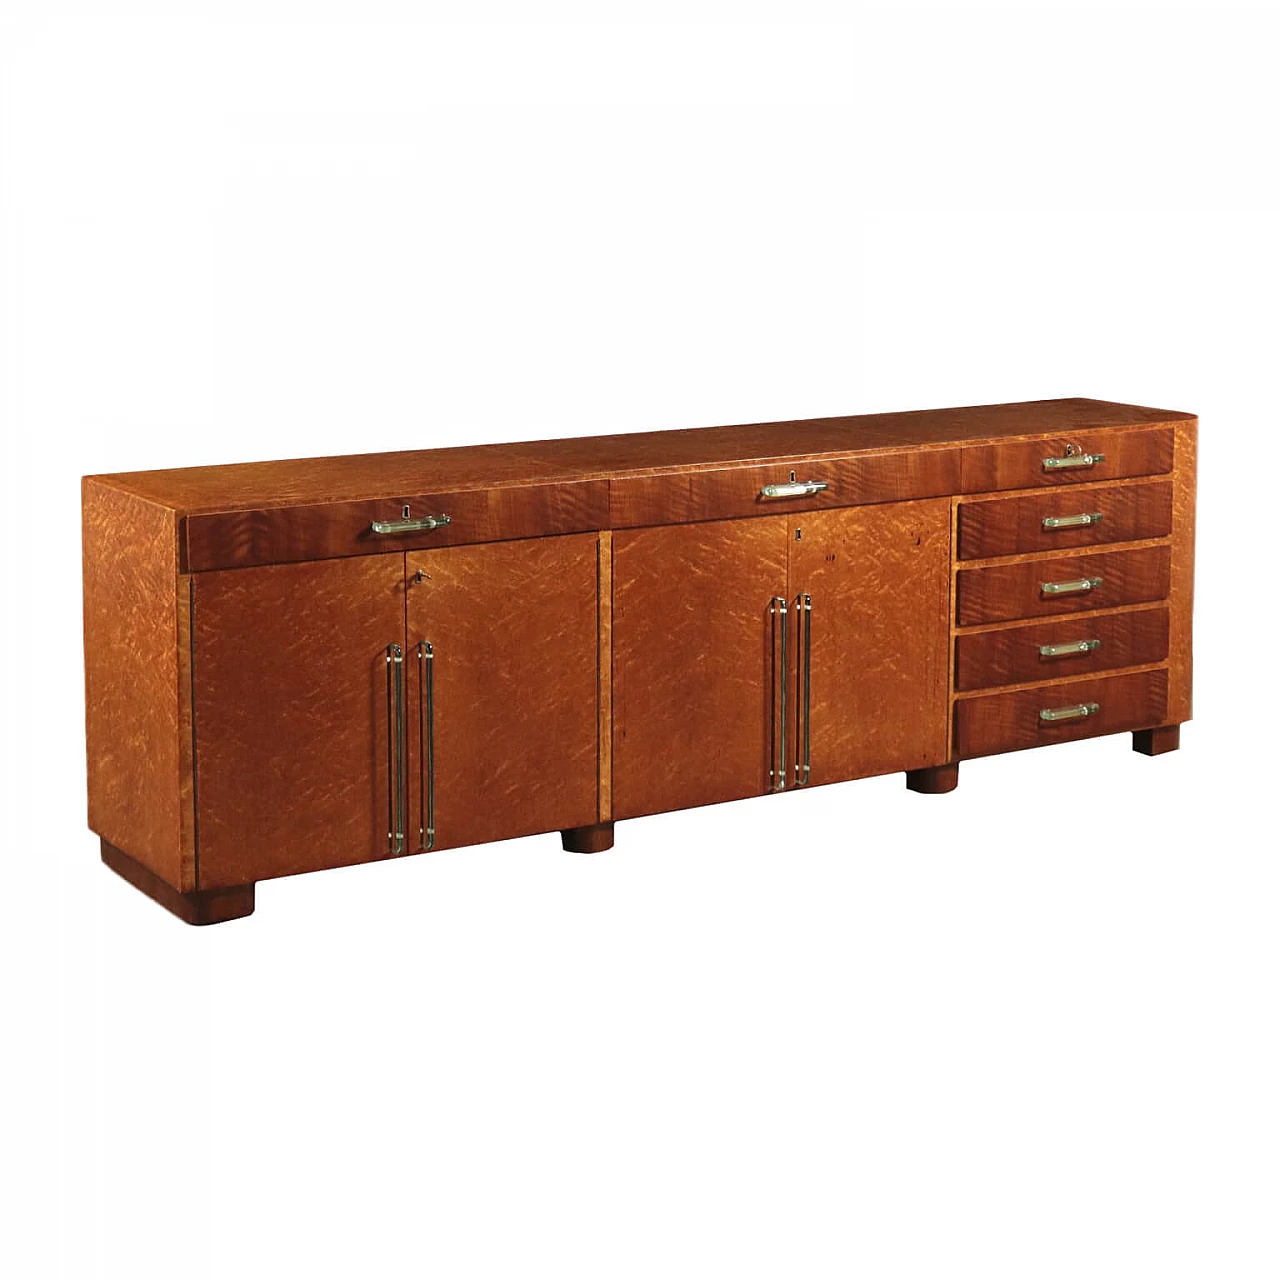 Briarwood sideboard with glass handles, 1940s 1134866